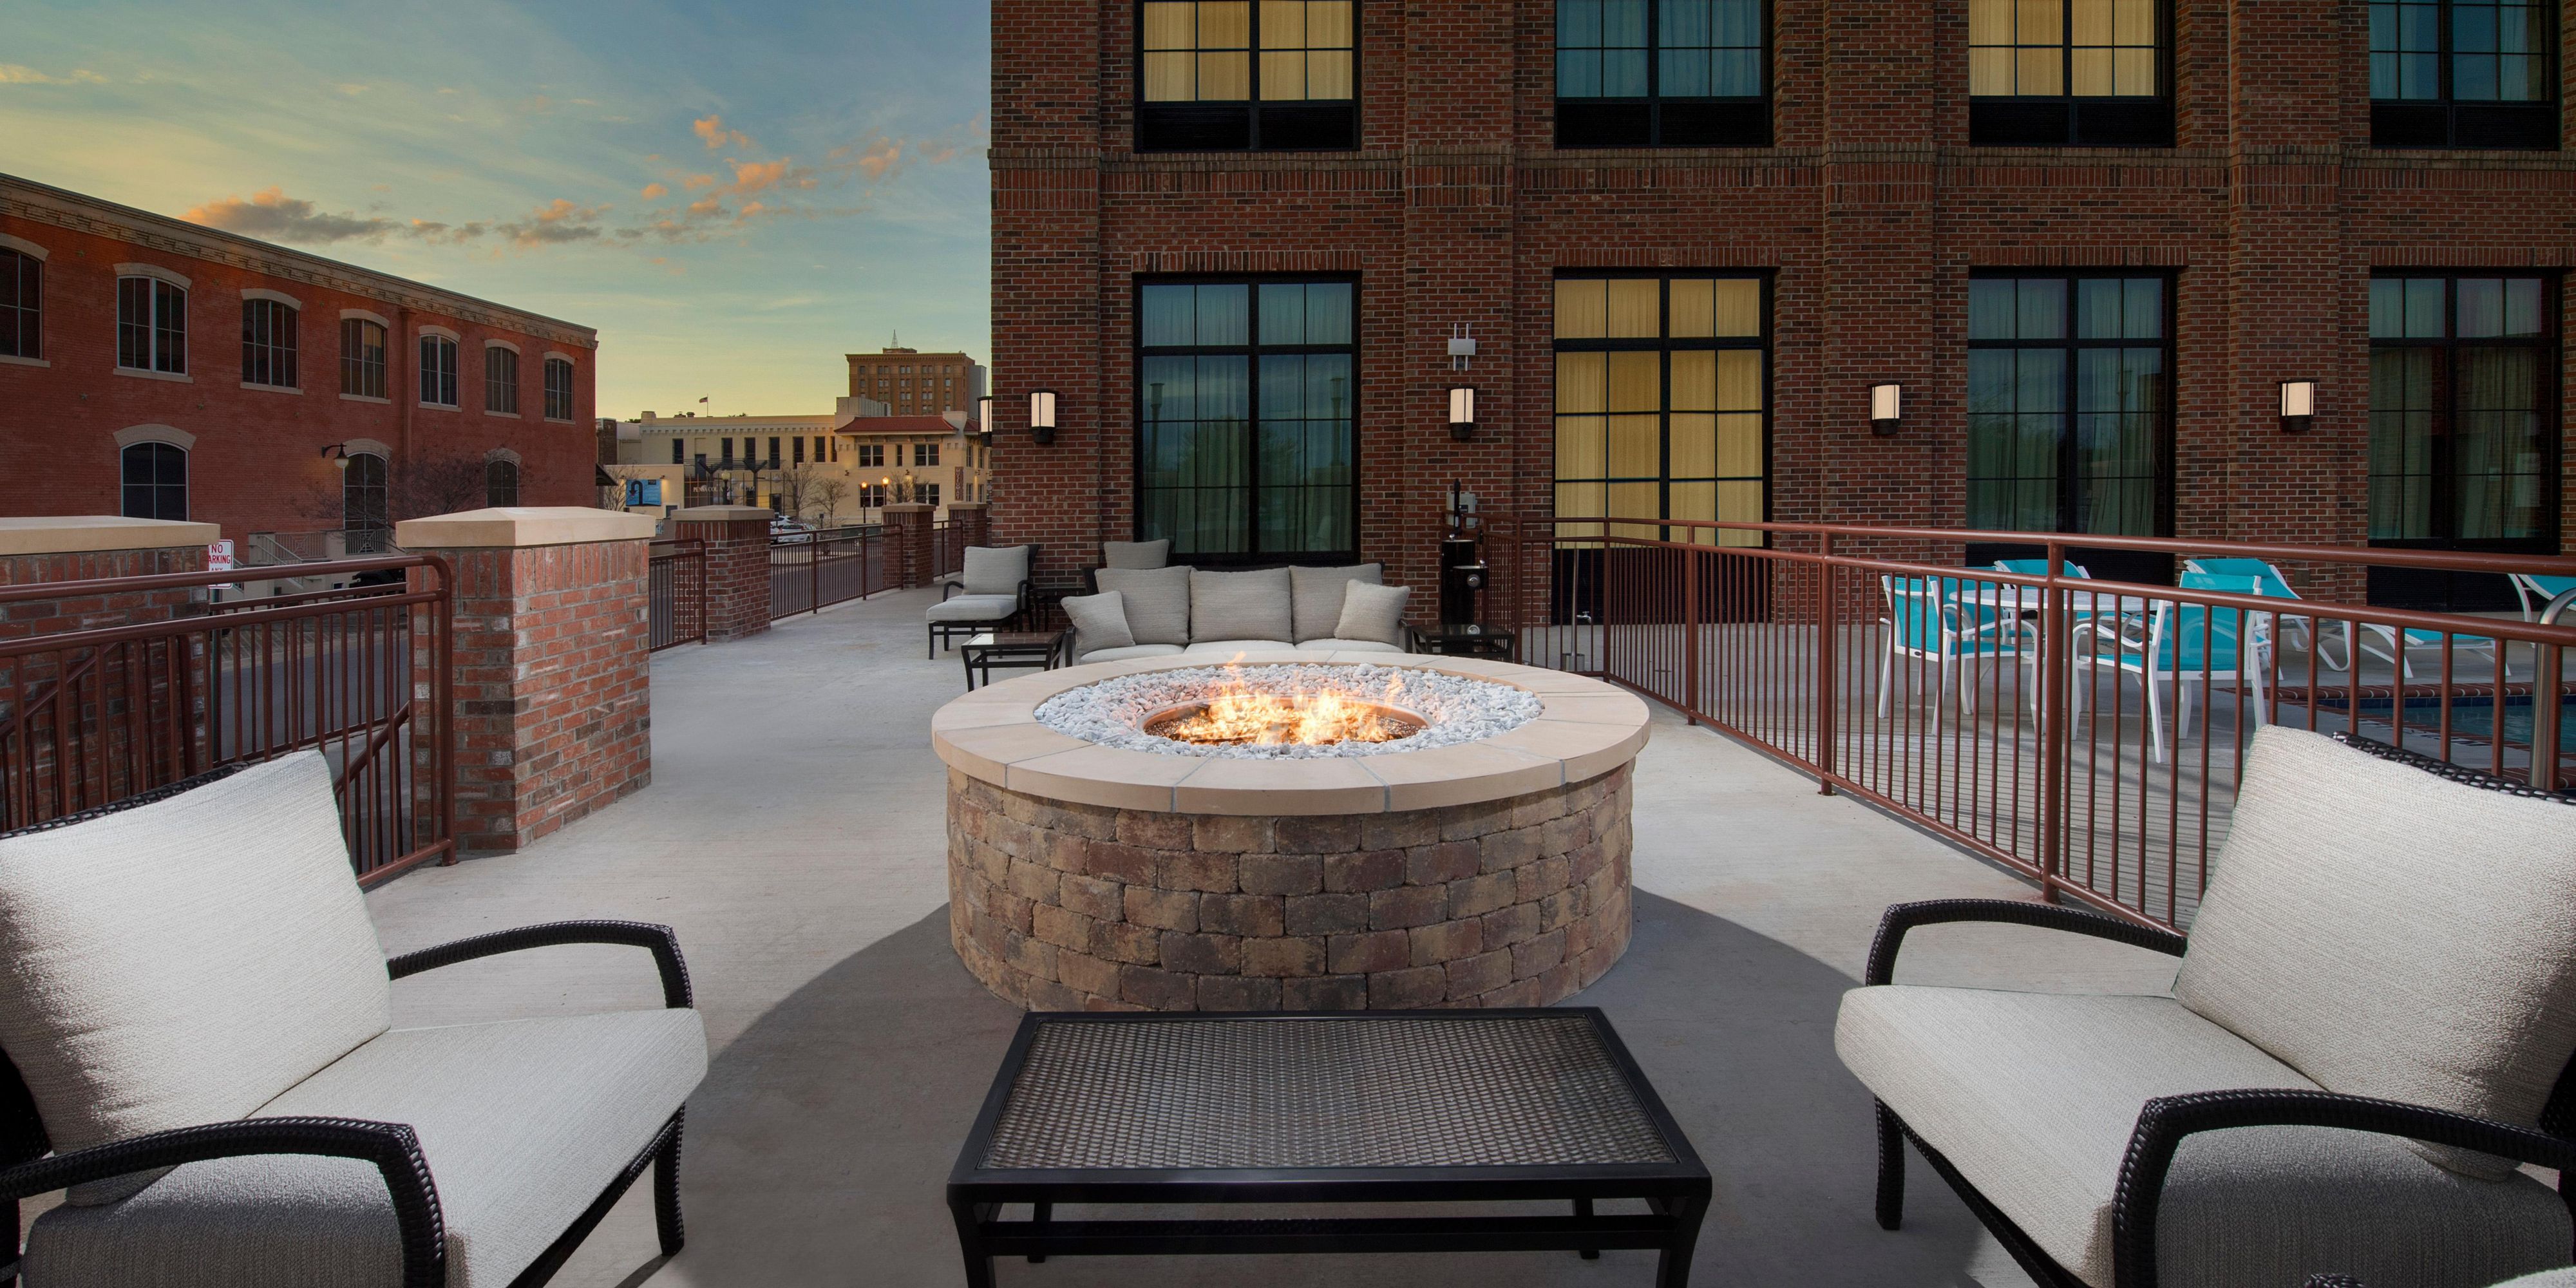 Relax and unwind by the fire pit while enjoying the night breeze from the gulf and harbor. As a Downtown hotel we are very conveniently located to local businesses and we have within walking distance to the Ferry to Pensacola Beach.